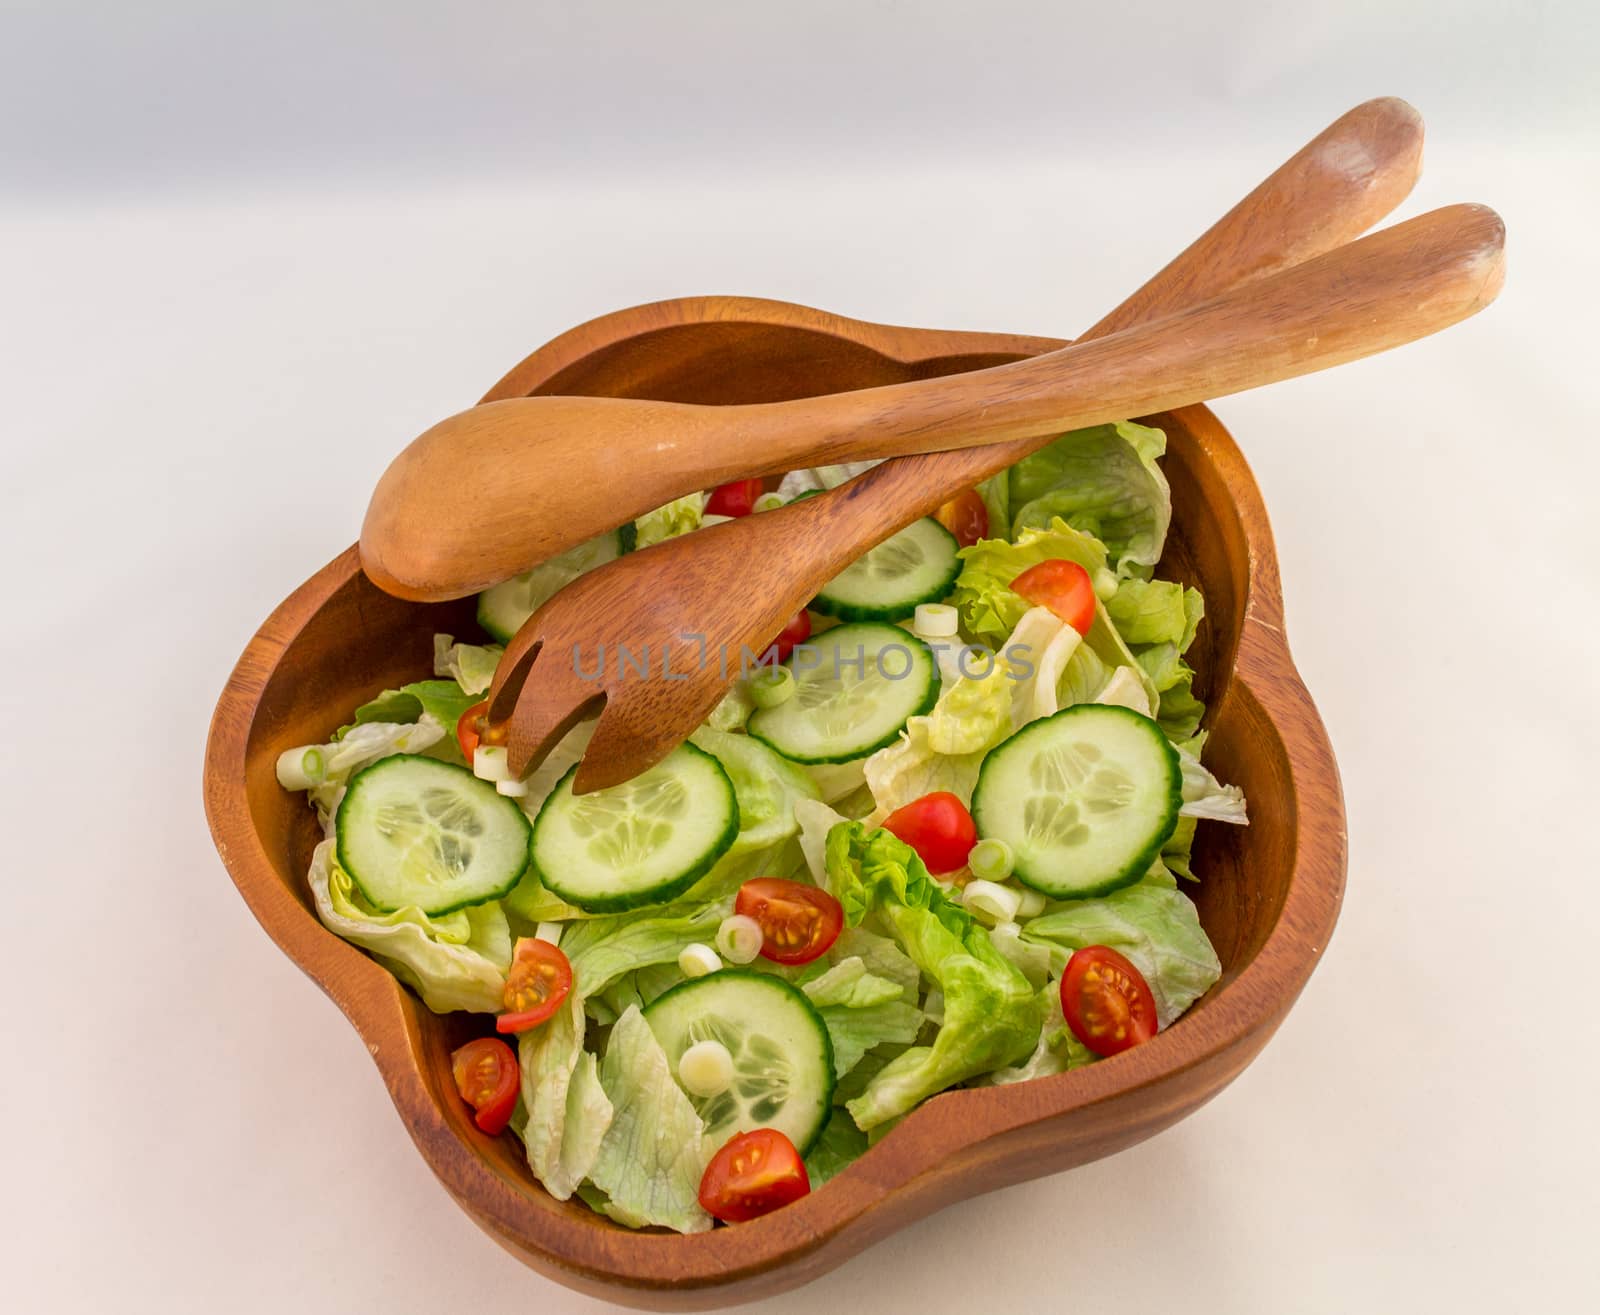 Bowl of mixed salad against a white background